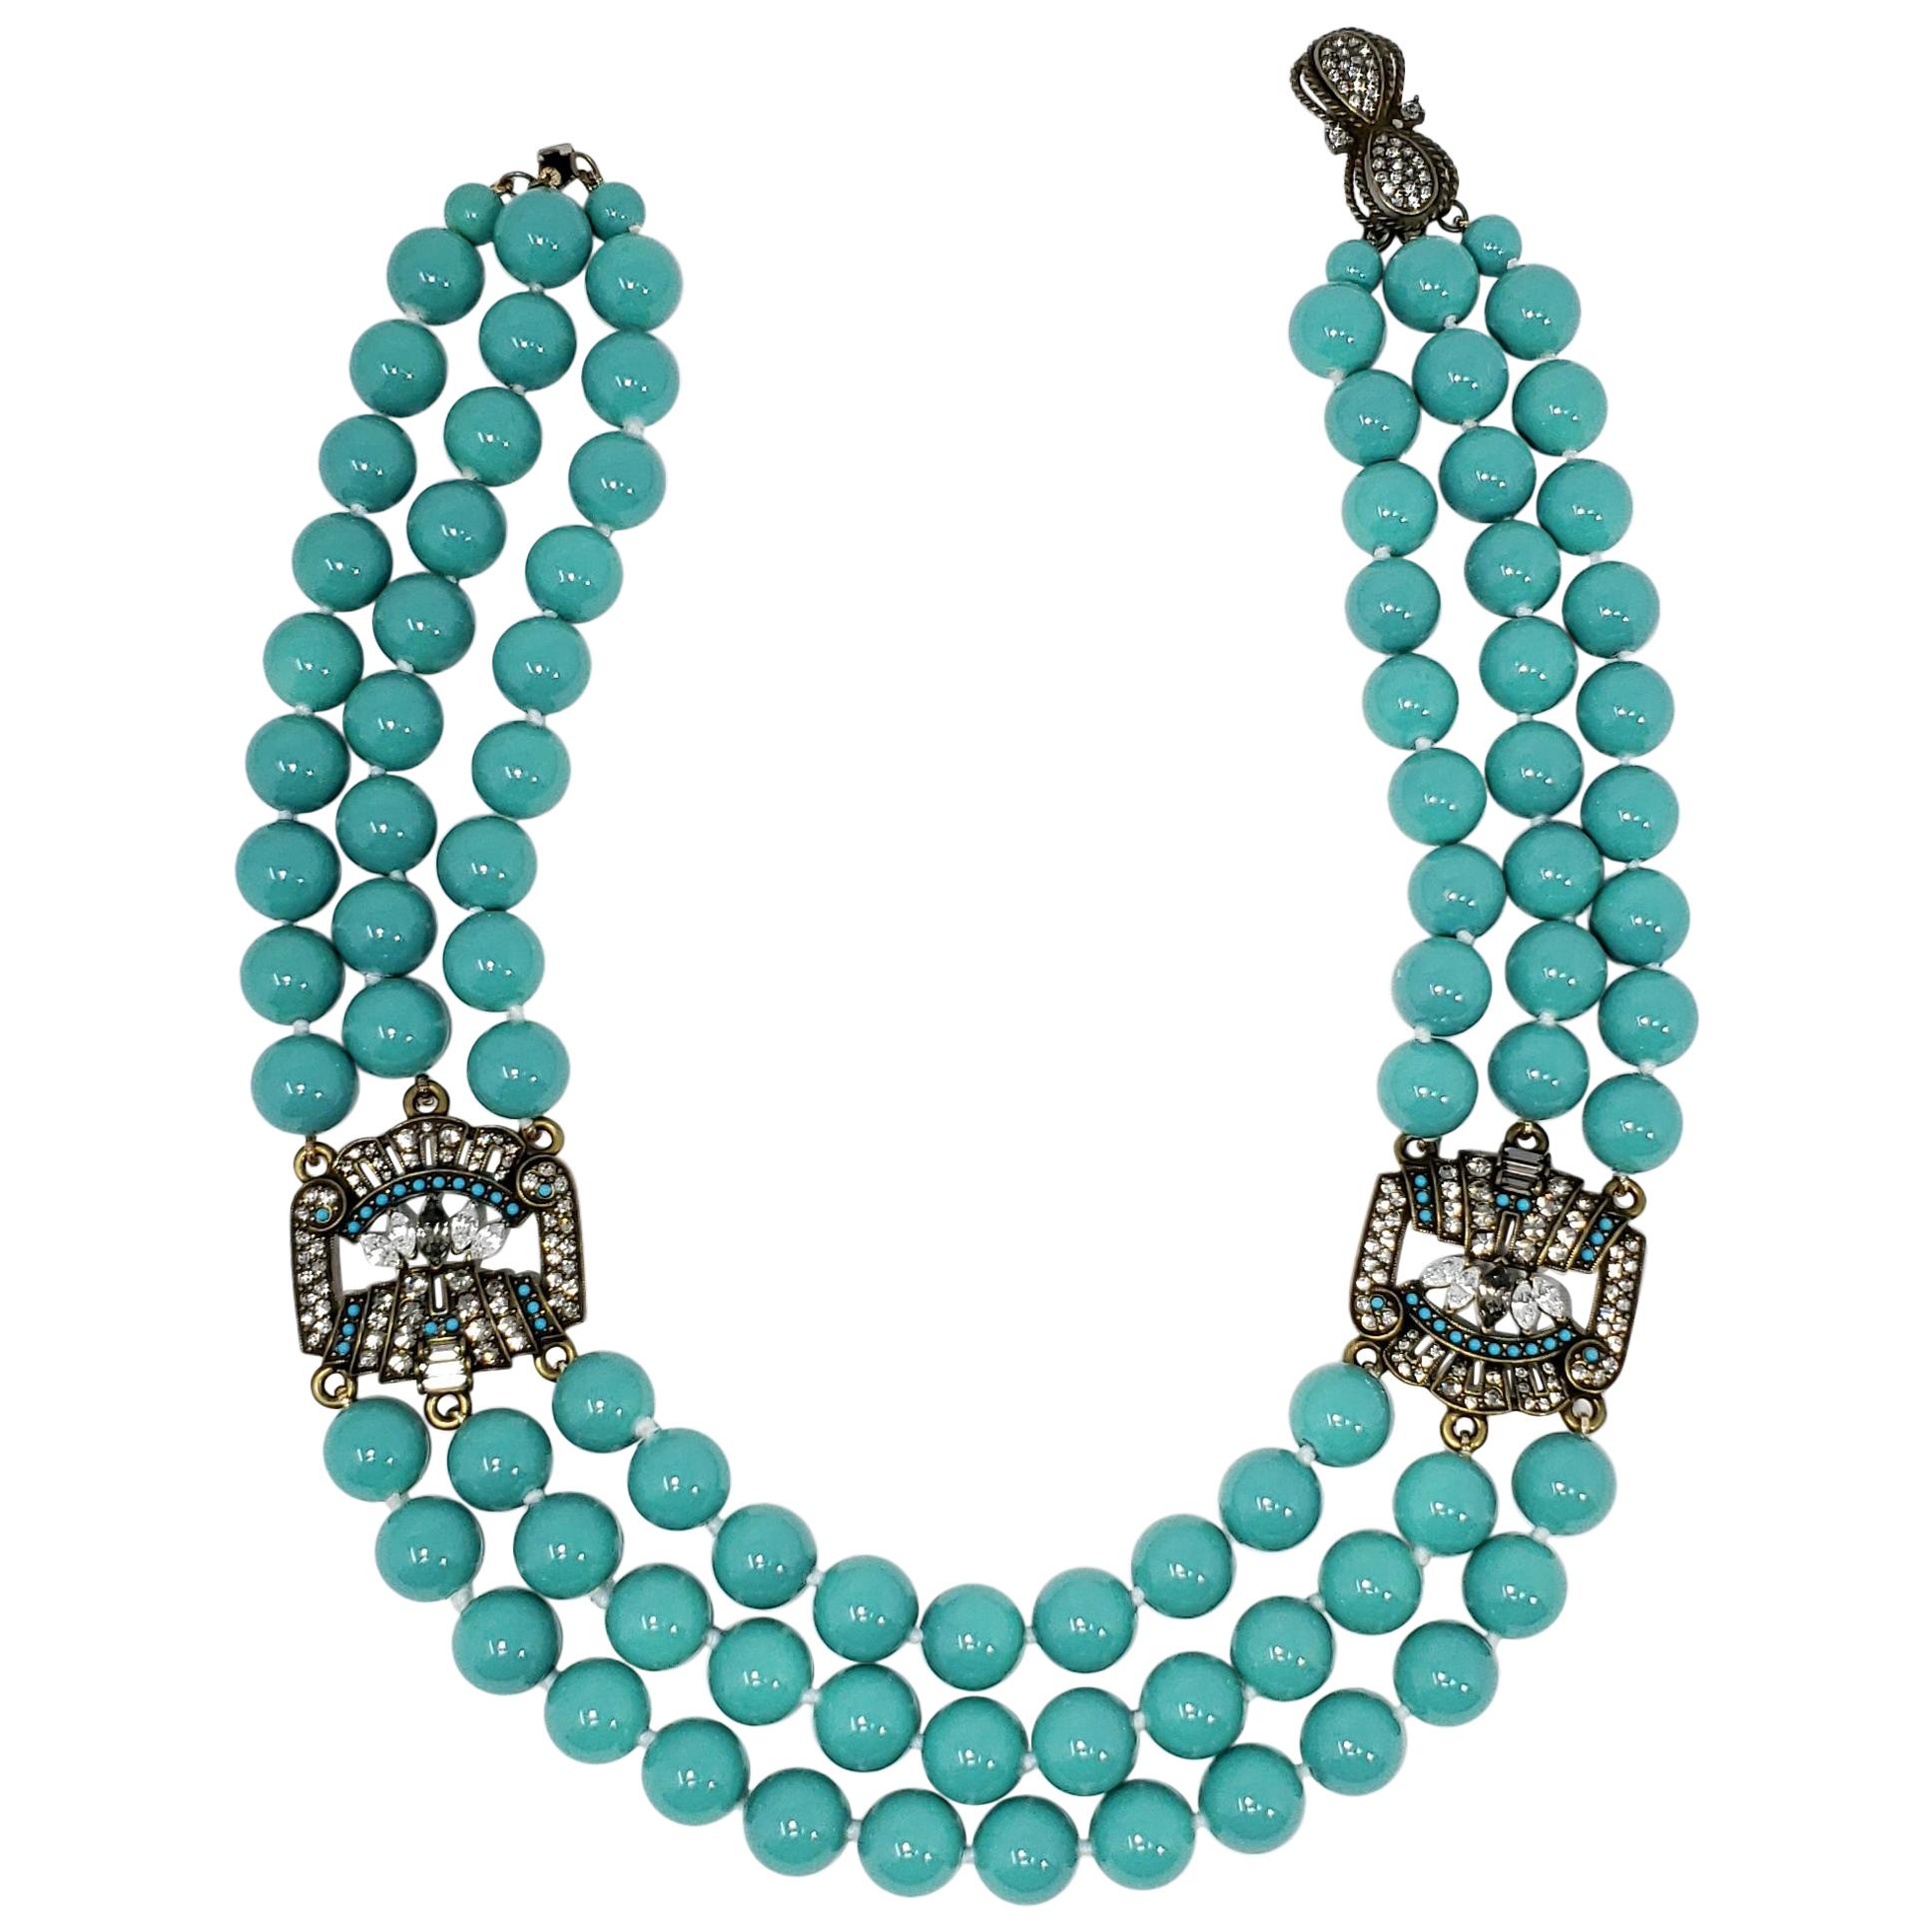 Heidi Daus Triple Strand Turquoise Bead and Crystal-Encrusted Accent Necklace